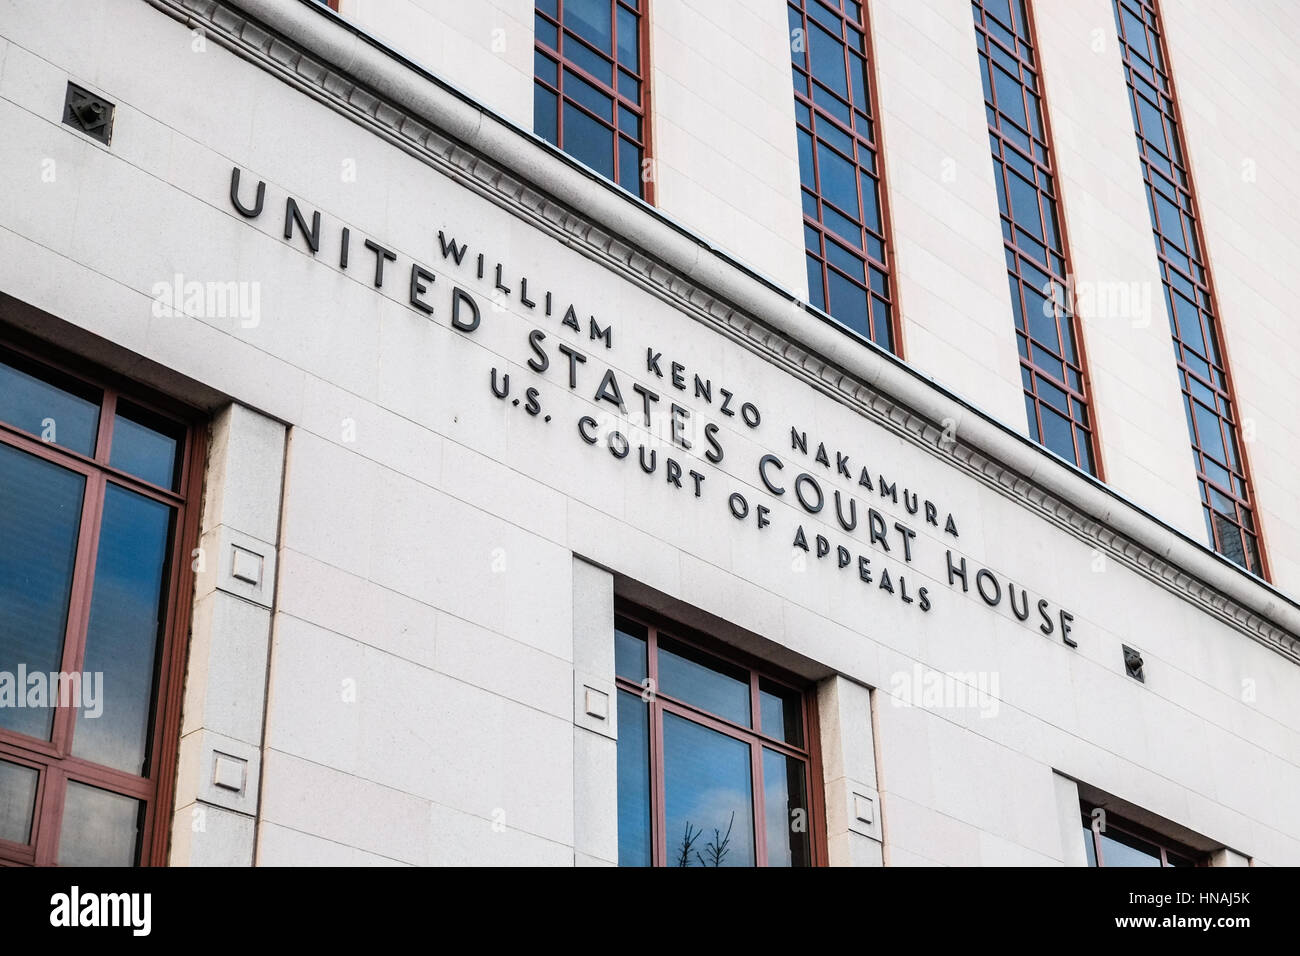 United States Court House - U.S. Court of Appeals Stock Photo